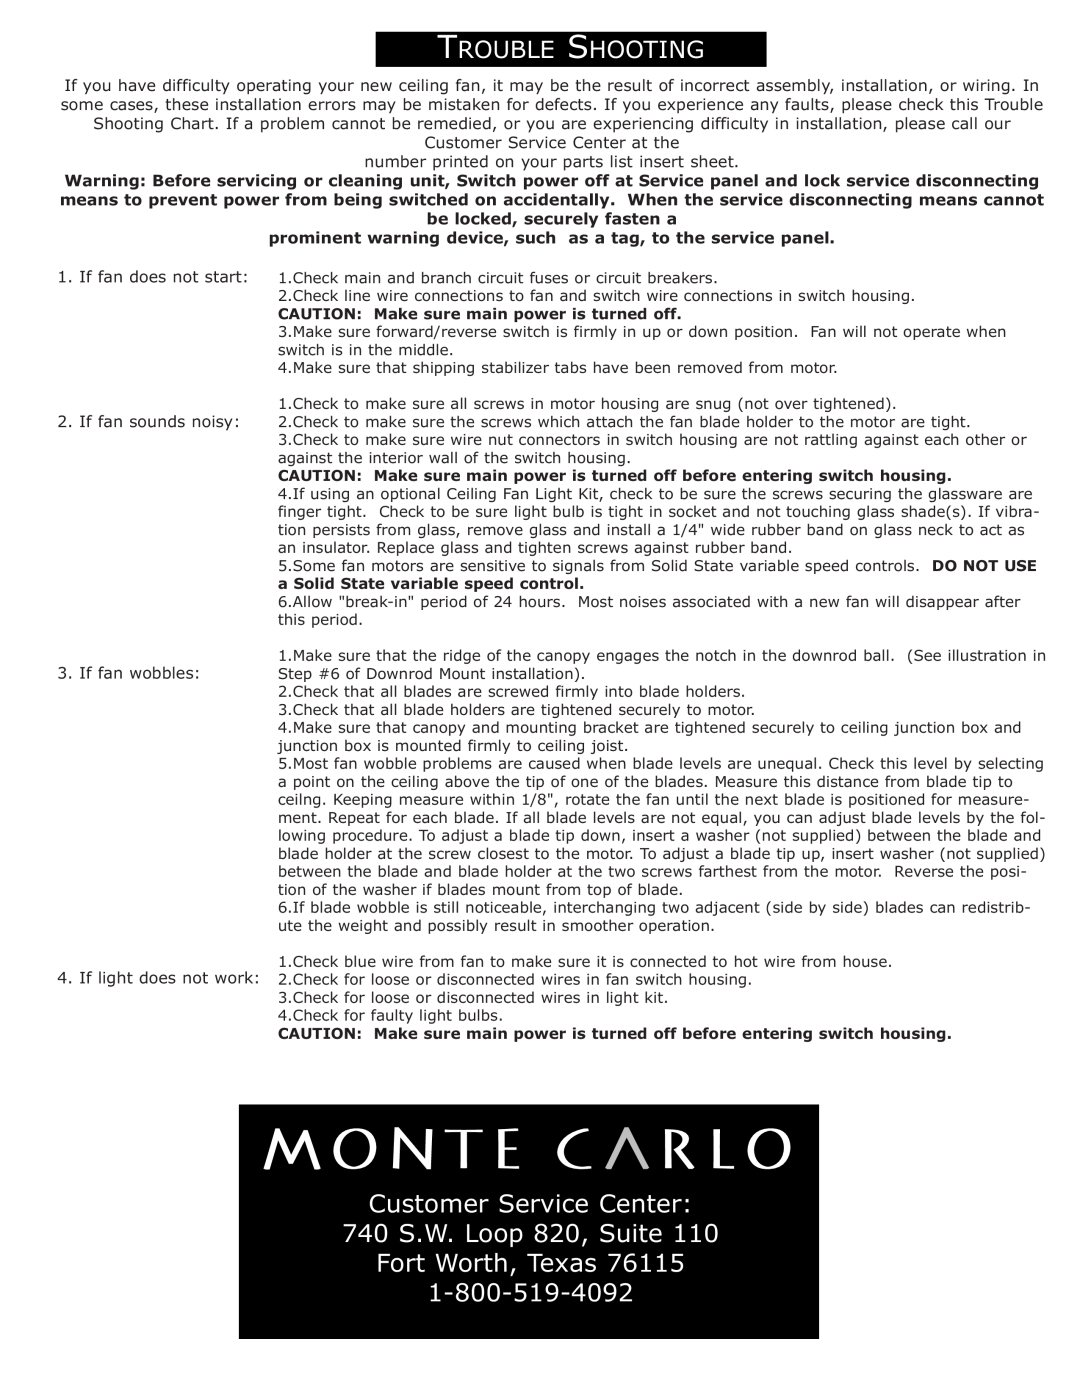 Monte Carlo Fan Company 5DI52 installation instructions Customer Service Center 740 S.W. Loop 820, Suite, Rouble Hooting 